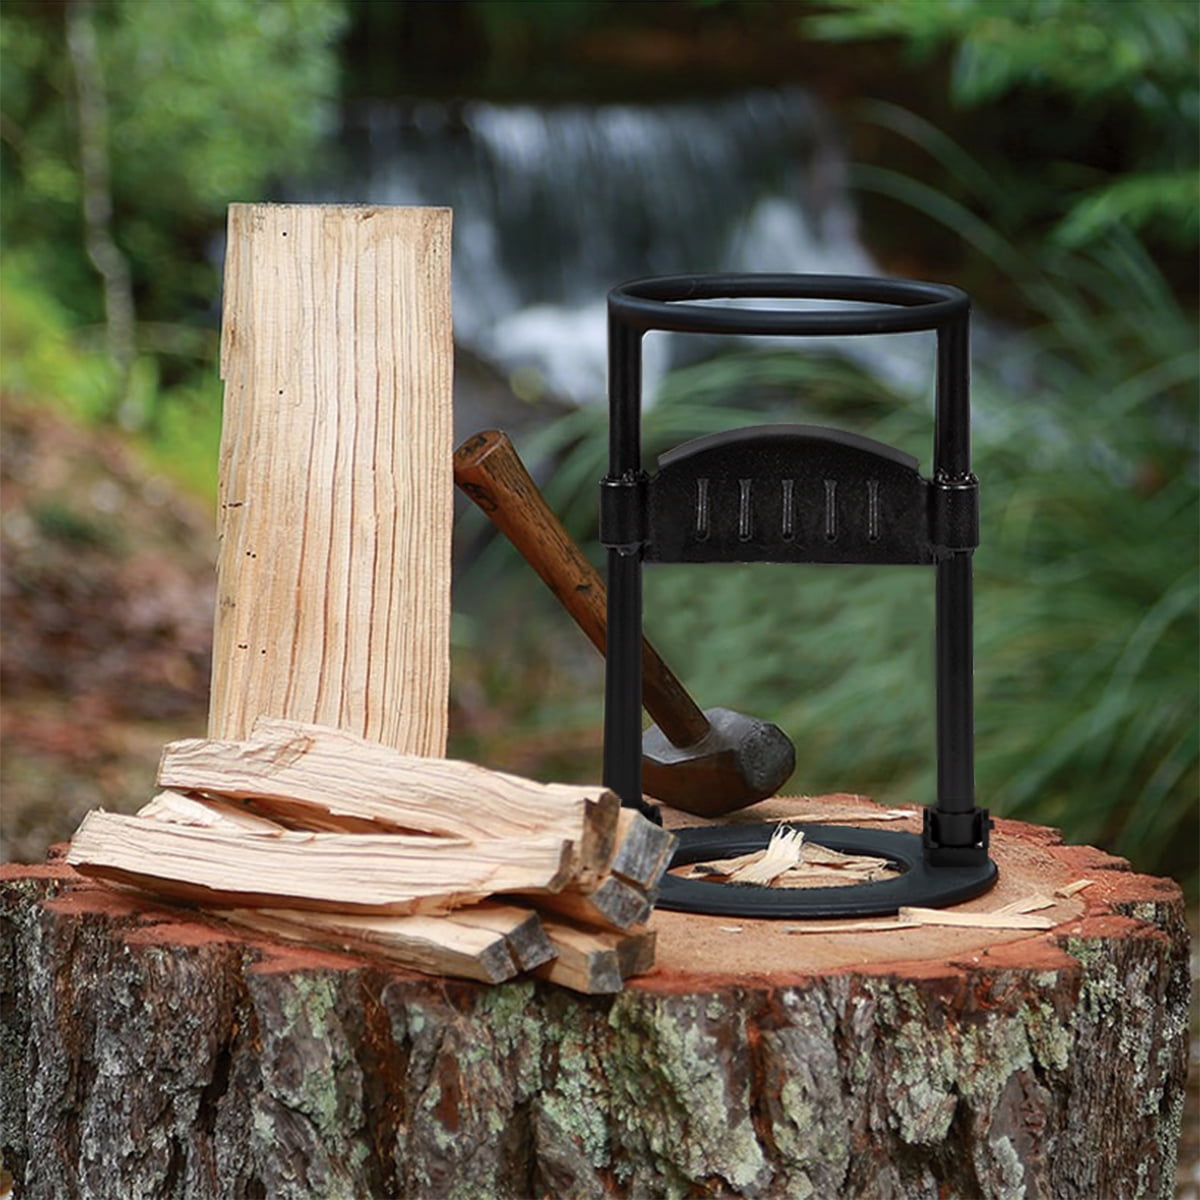 Details about   Wood Kindling Splitter Log Splitter Chop Firewood for Wood Stove and Fireplace 